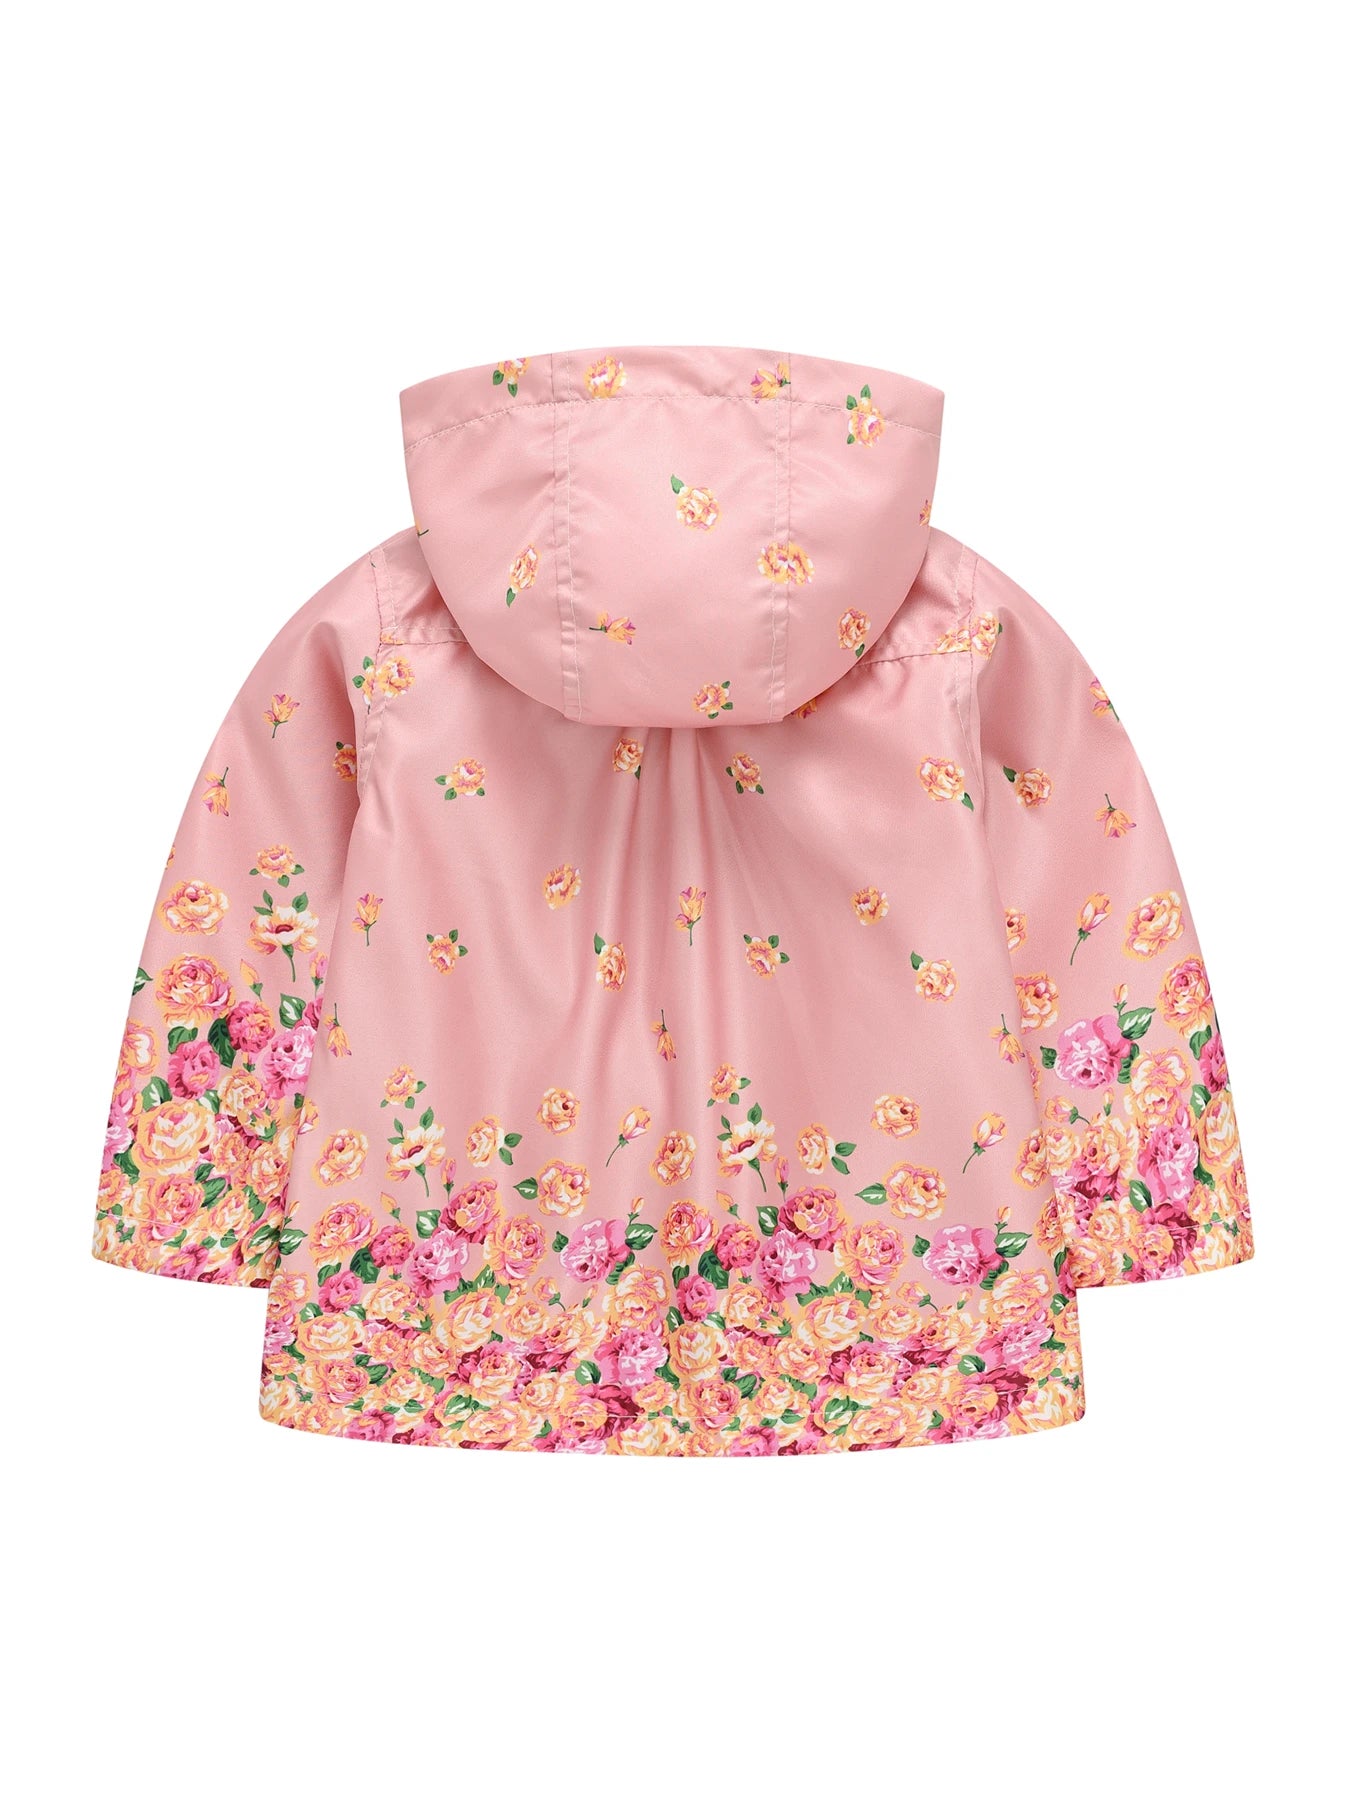 Adorable Butterfly Cartoon Hoodie for Girls - A Perfect Casual Jacket!